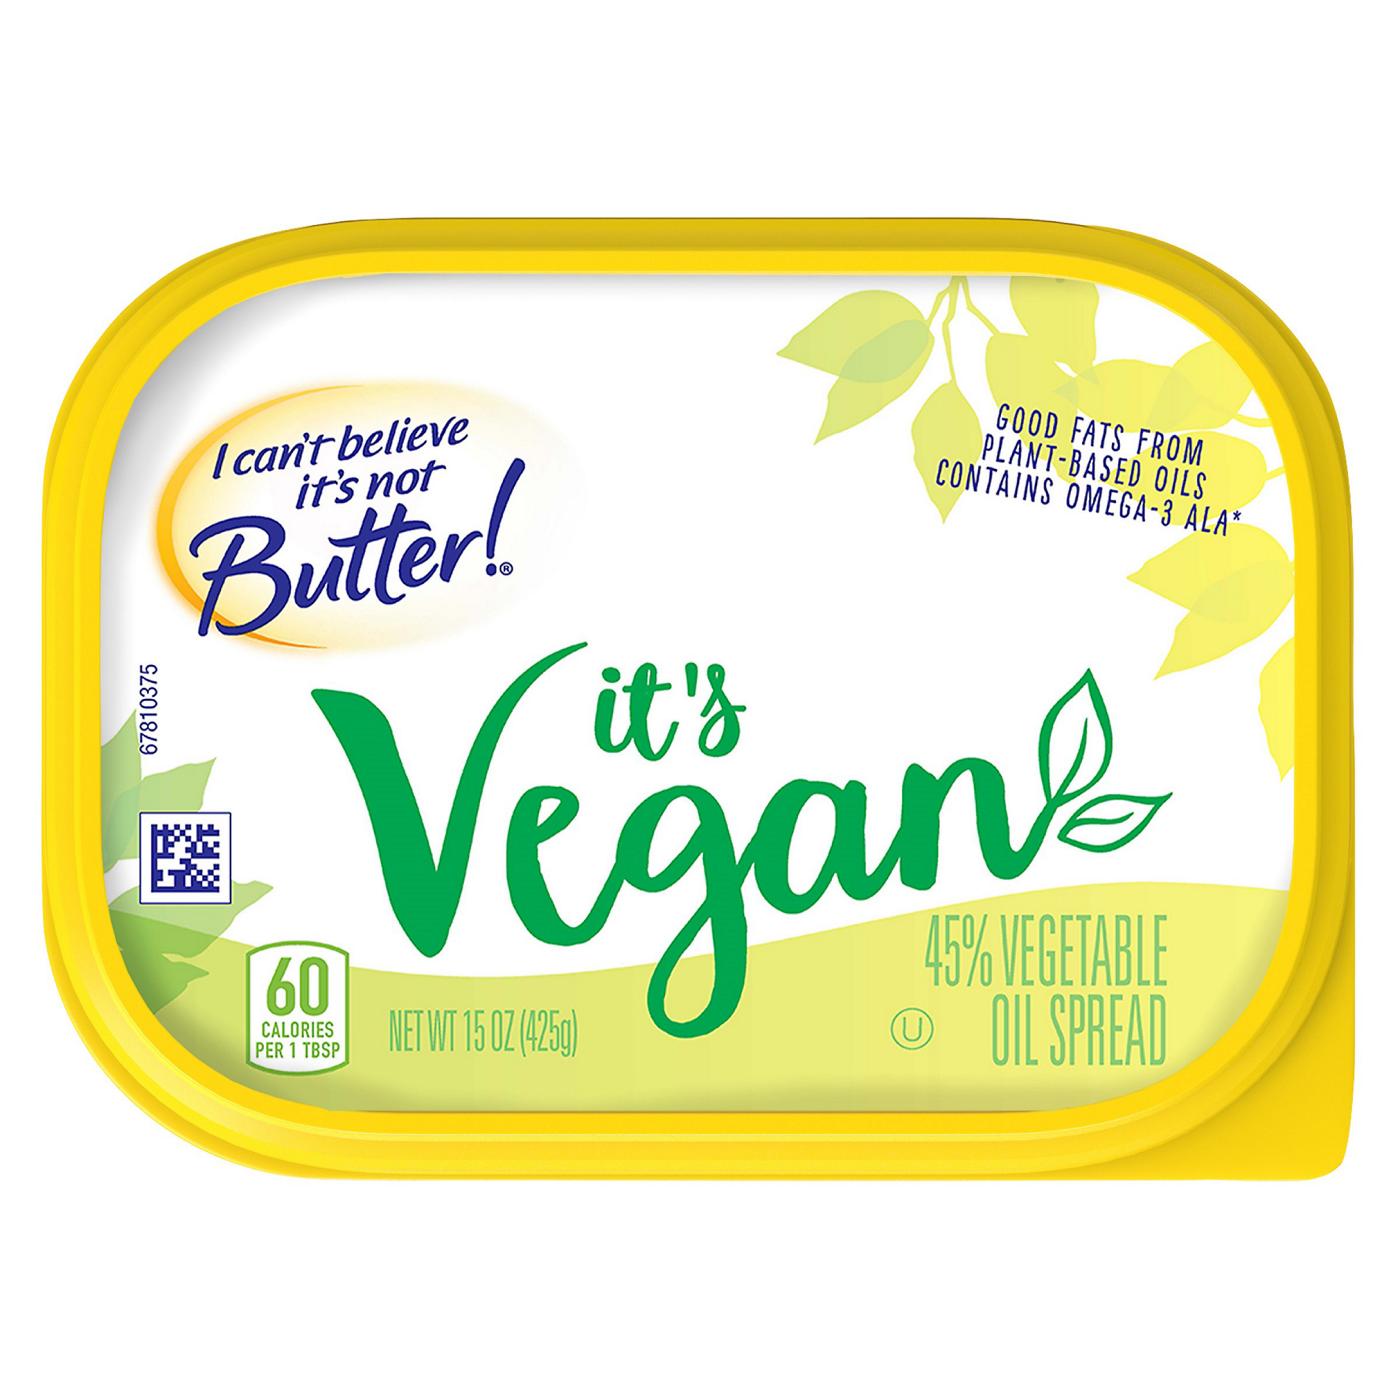 I Can't Believe It's Not Butter! Vegan Spread; image 8 of 9